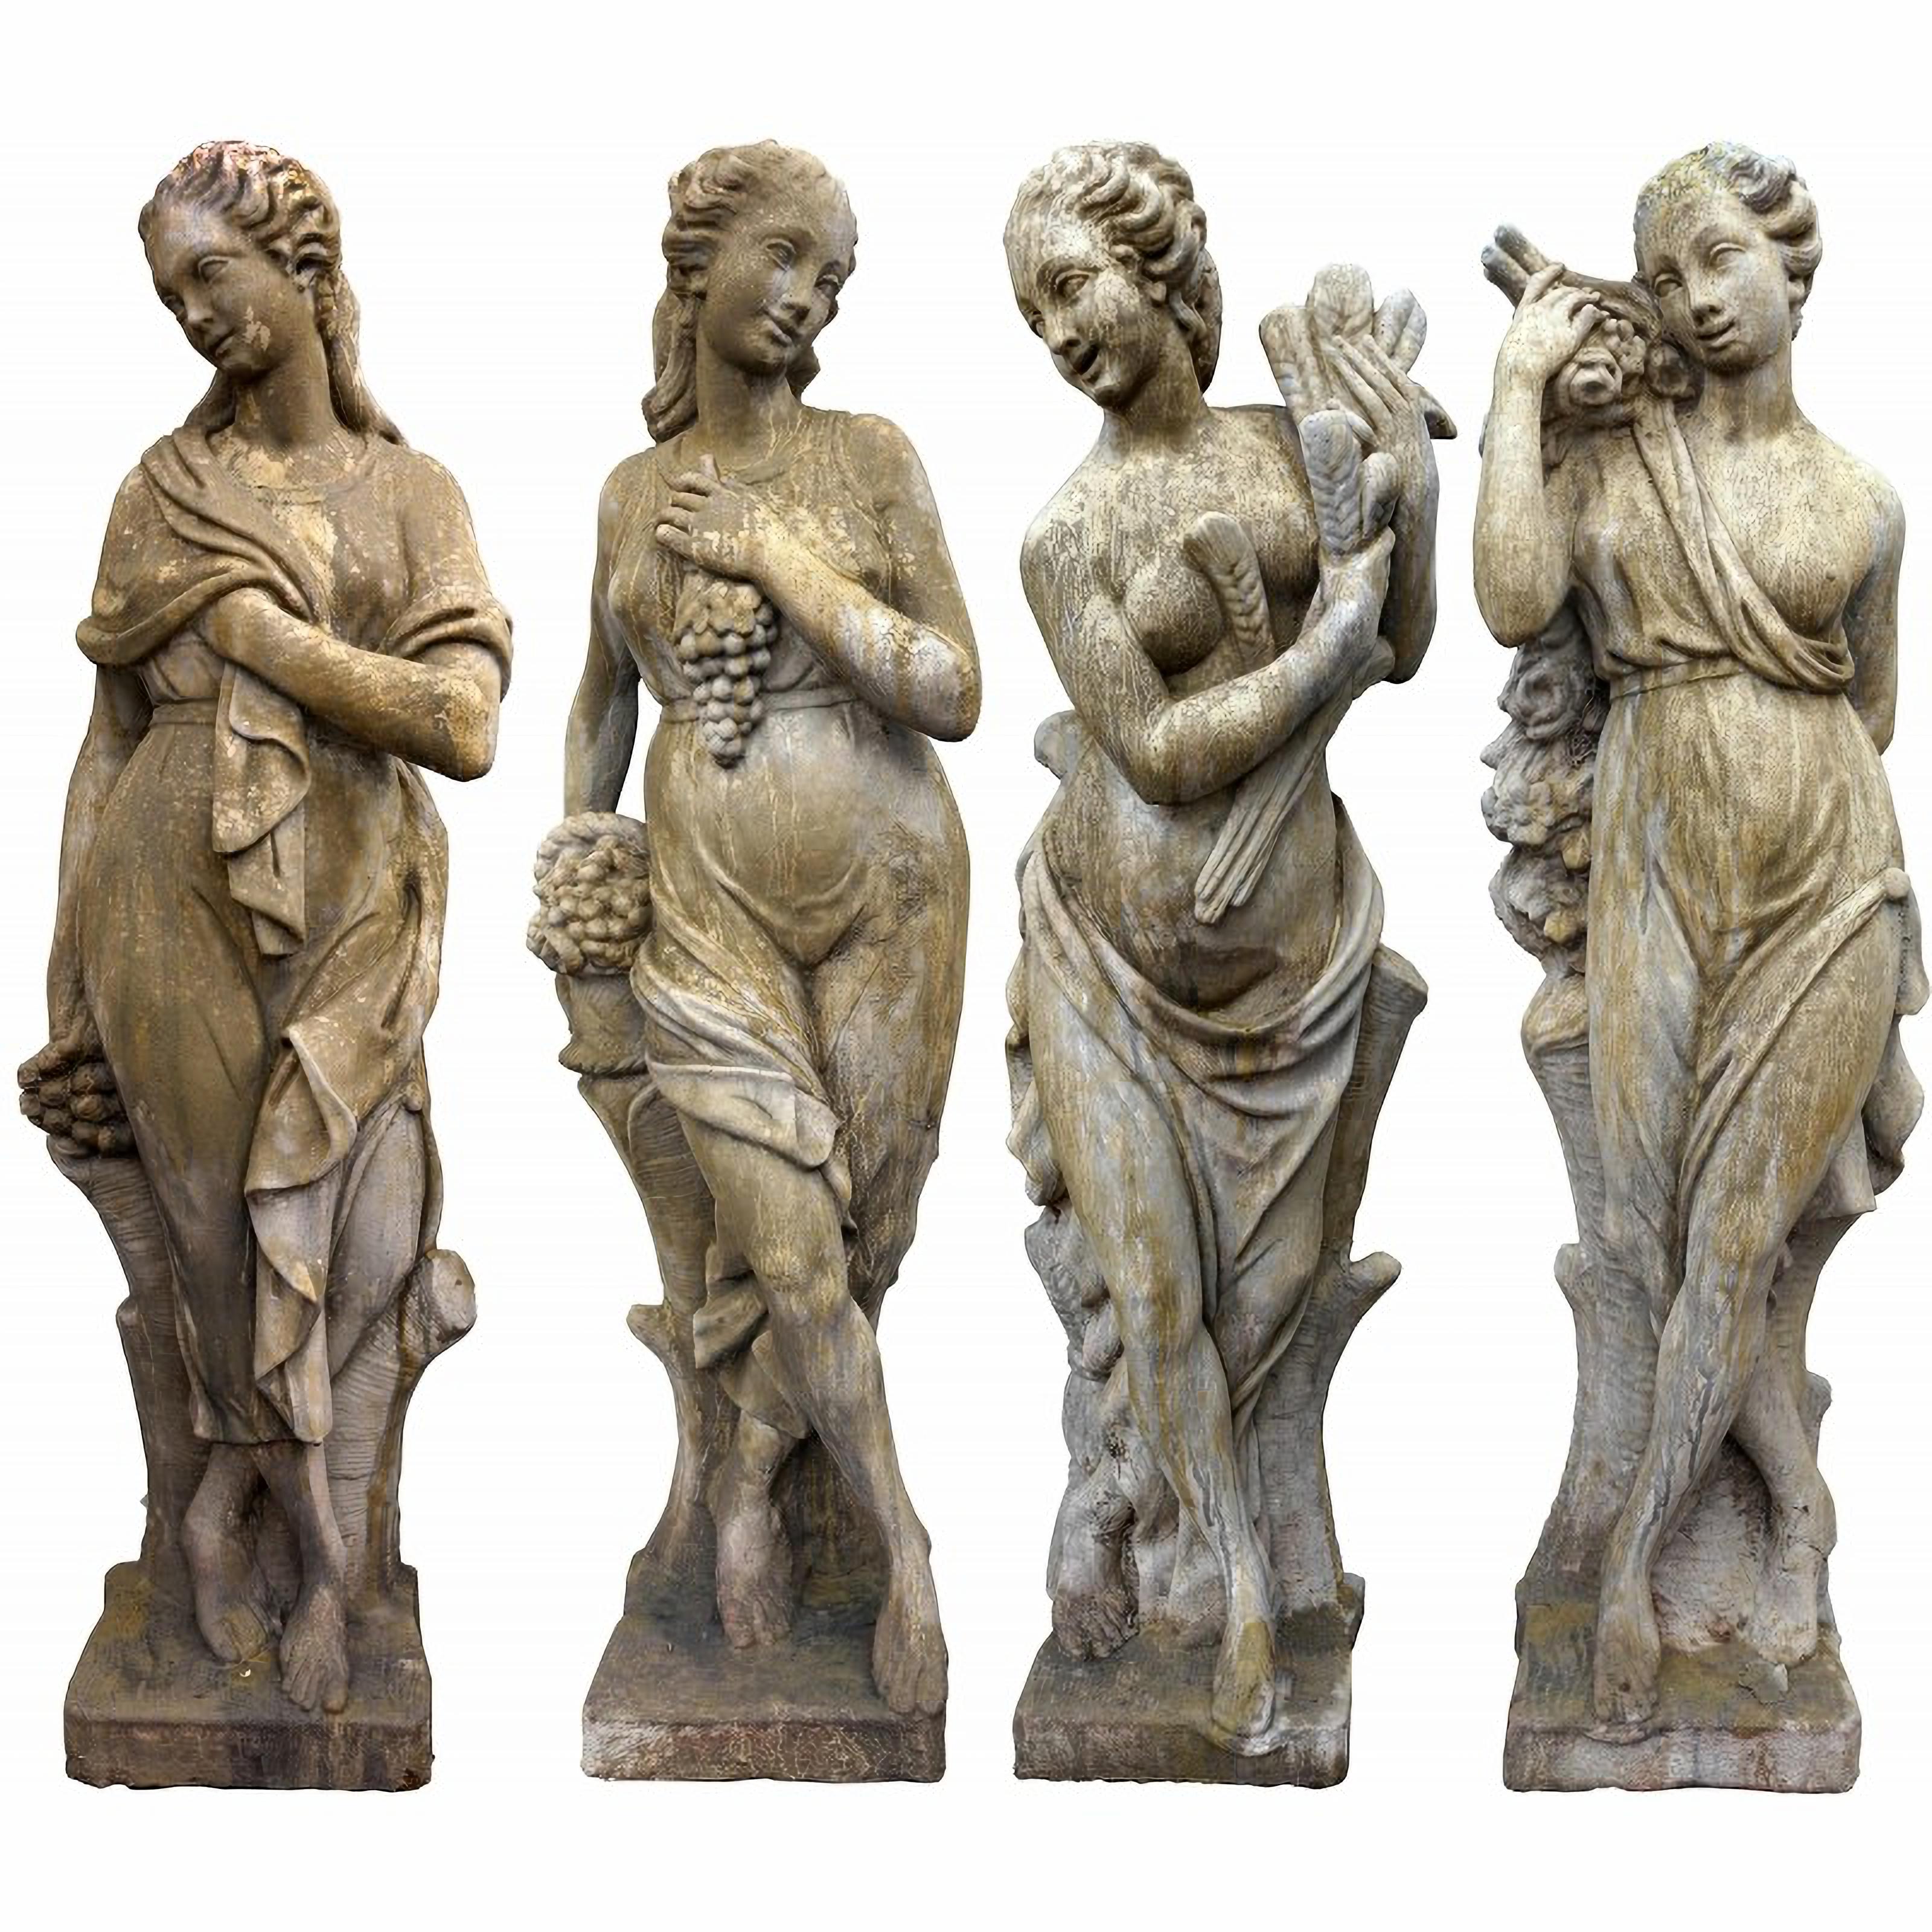 Modern 4 Reconstituted Stone Garden Statues with Base - the Four Seasons Early 20th Cen